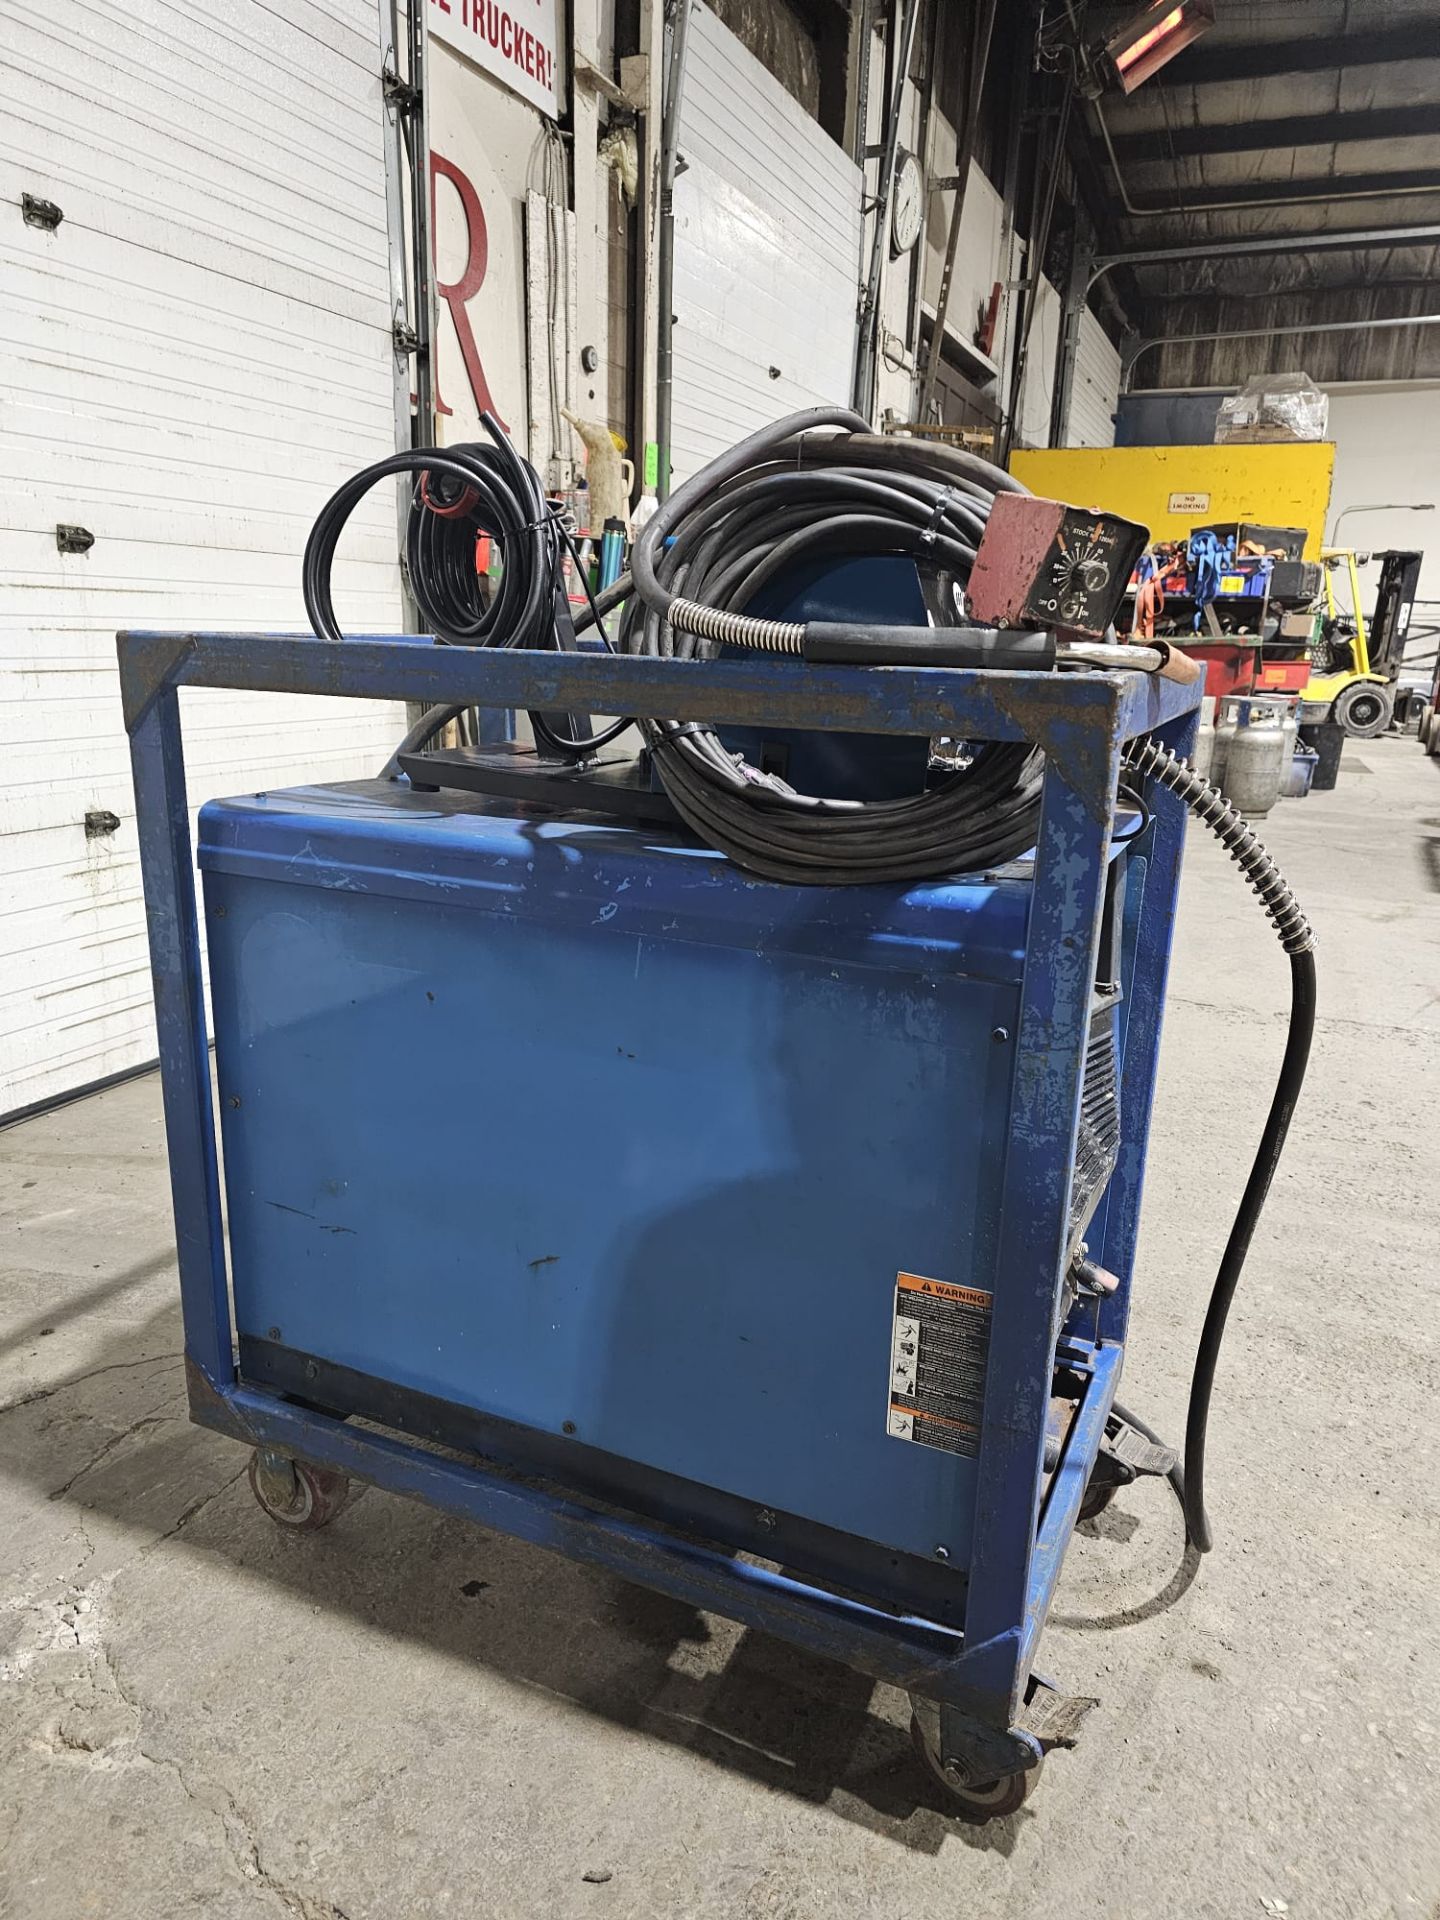 Miller Dimension 652 Mig Welder 650 Amp Mig Tig Stick Multi Process Power Source with 22A Wire - Image 2 of 6